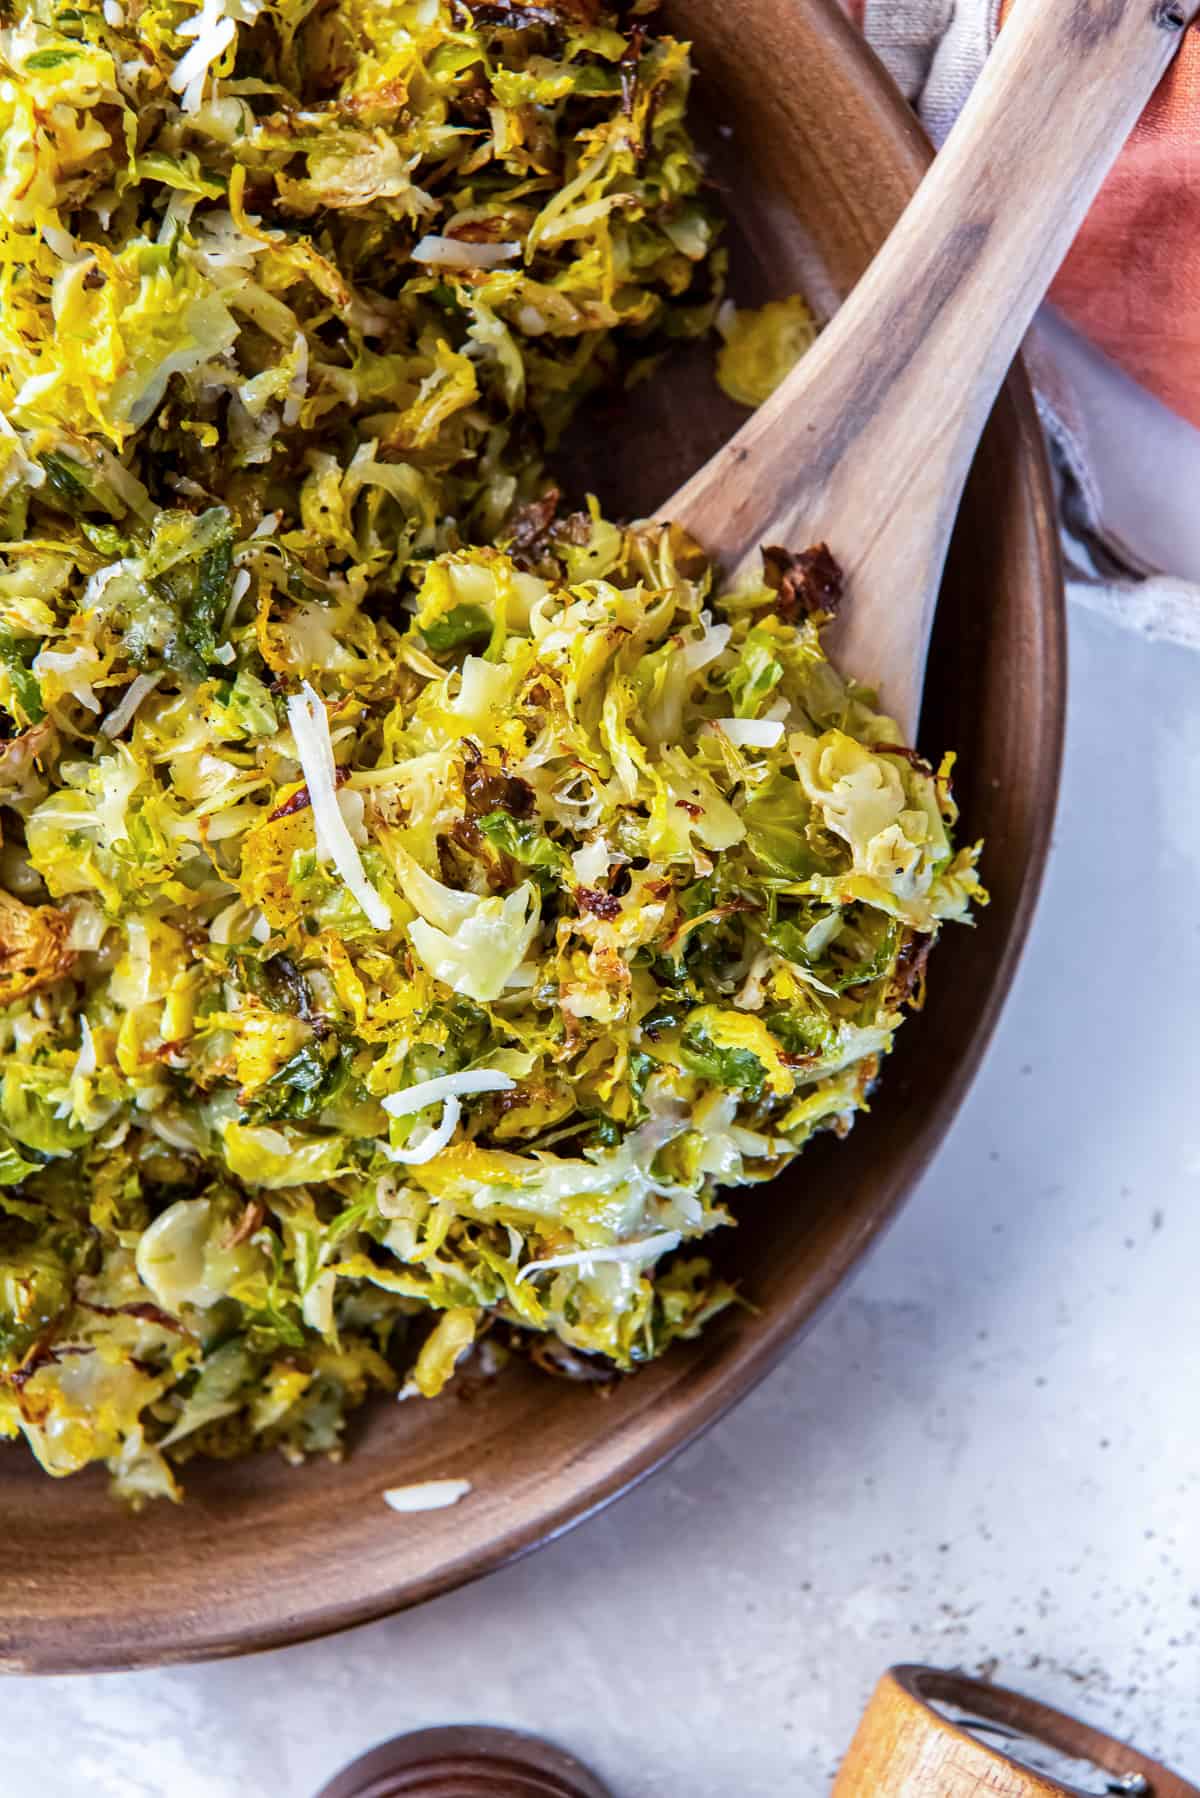 A spoon scooping roasted shredded Brussels sprouts from a bowl.